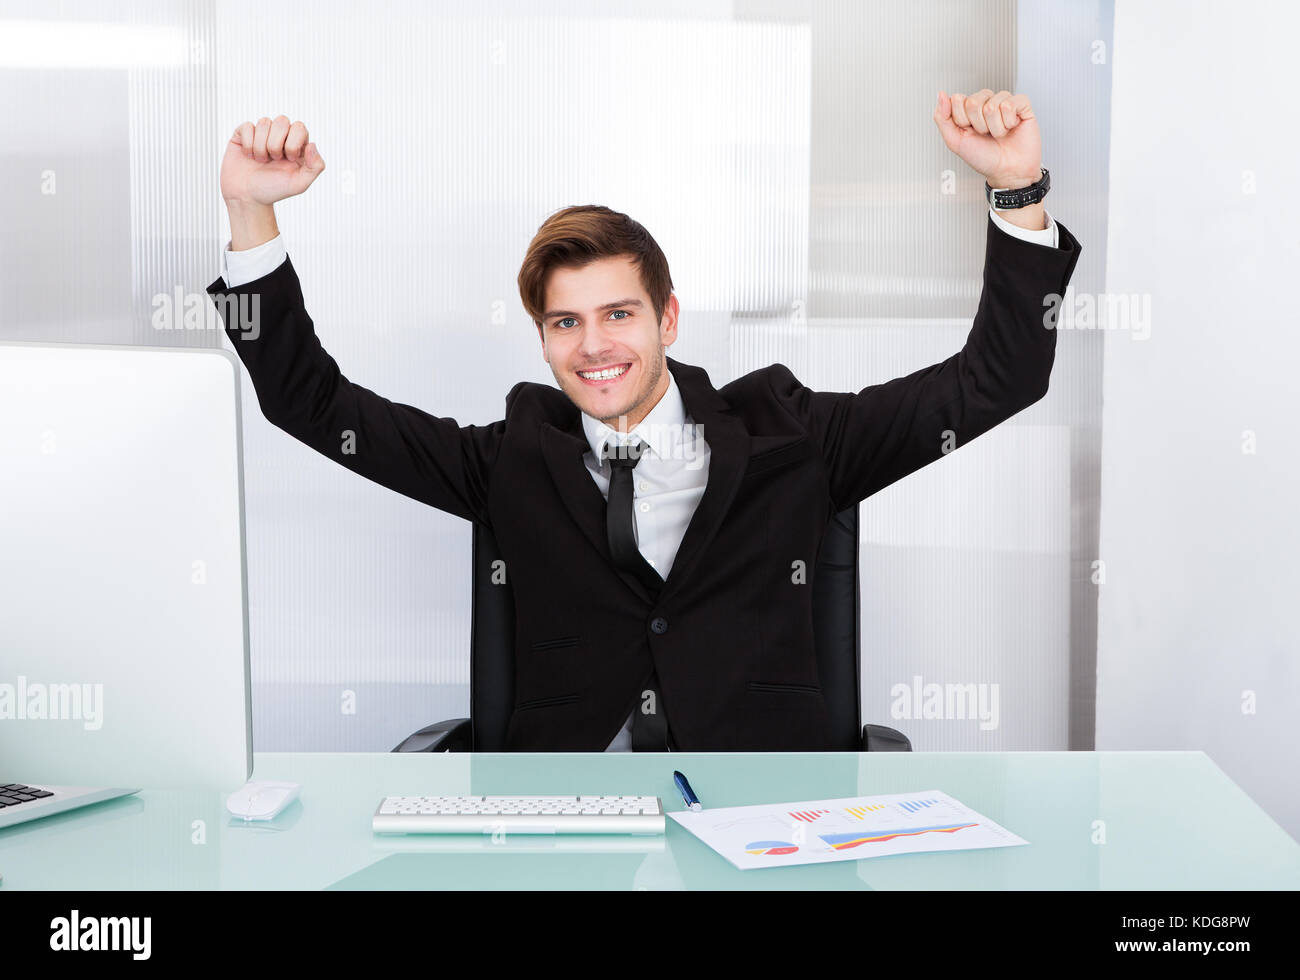 Happy Young Successful Excited Businessman Raising Hand Stock Photo